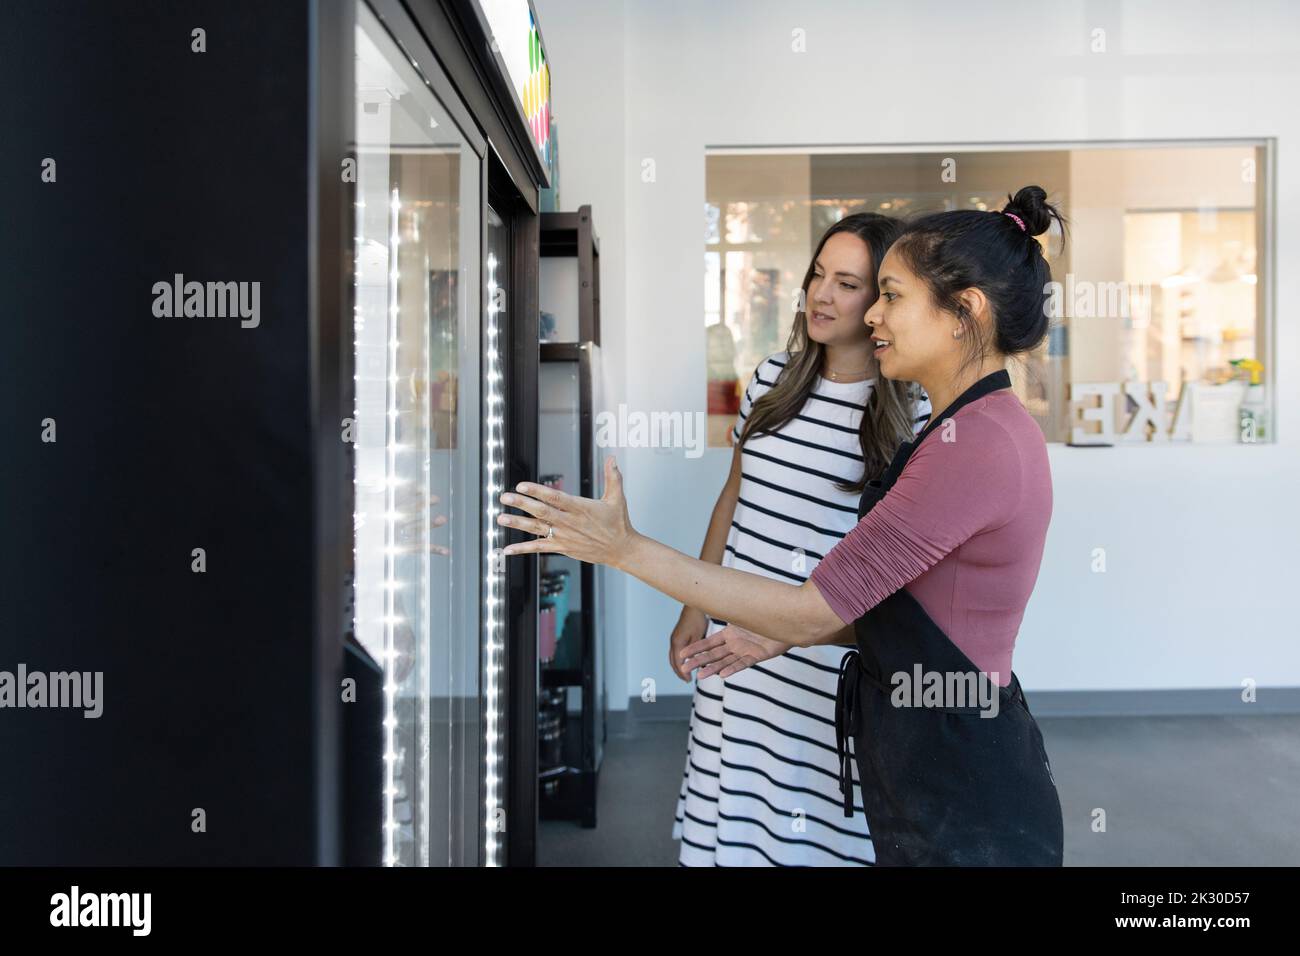 Small business owner and customer looking in refridgerator Stock Photo